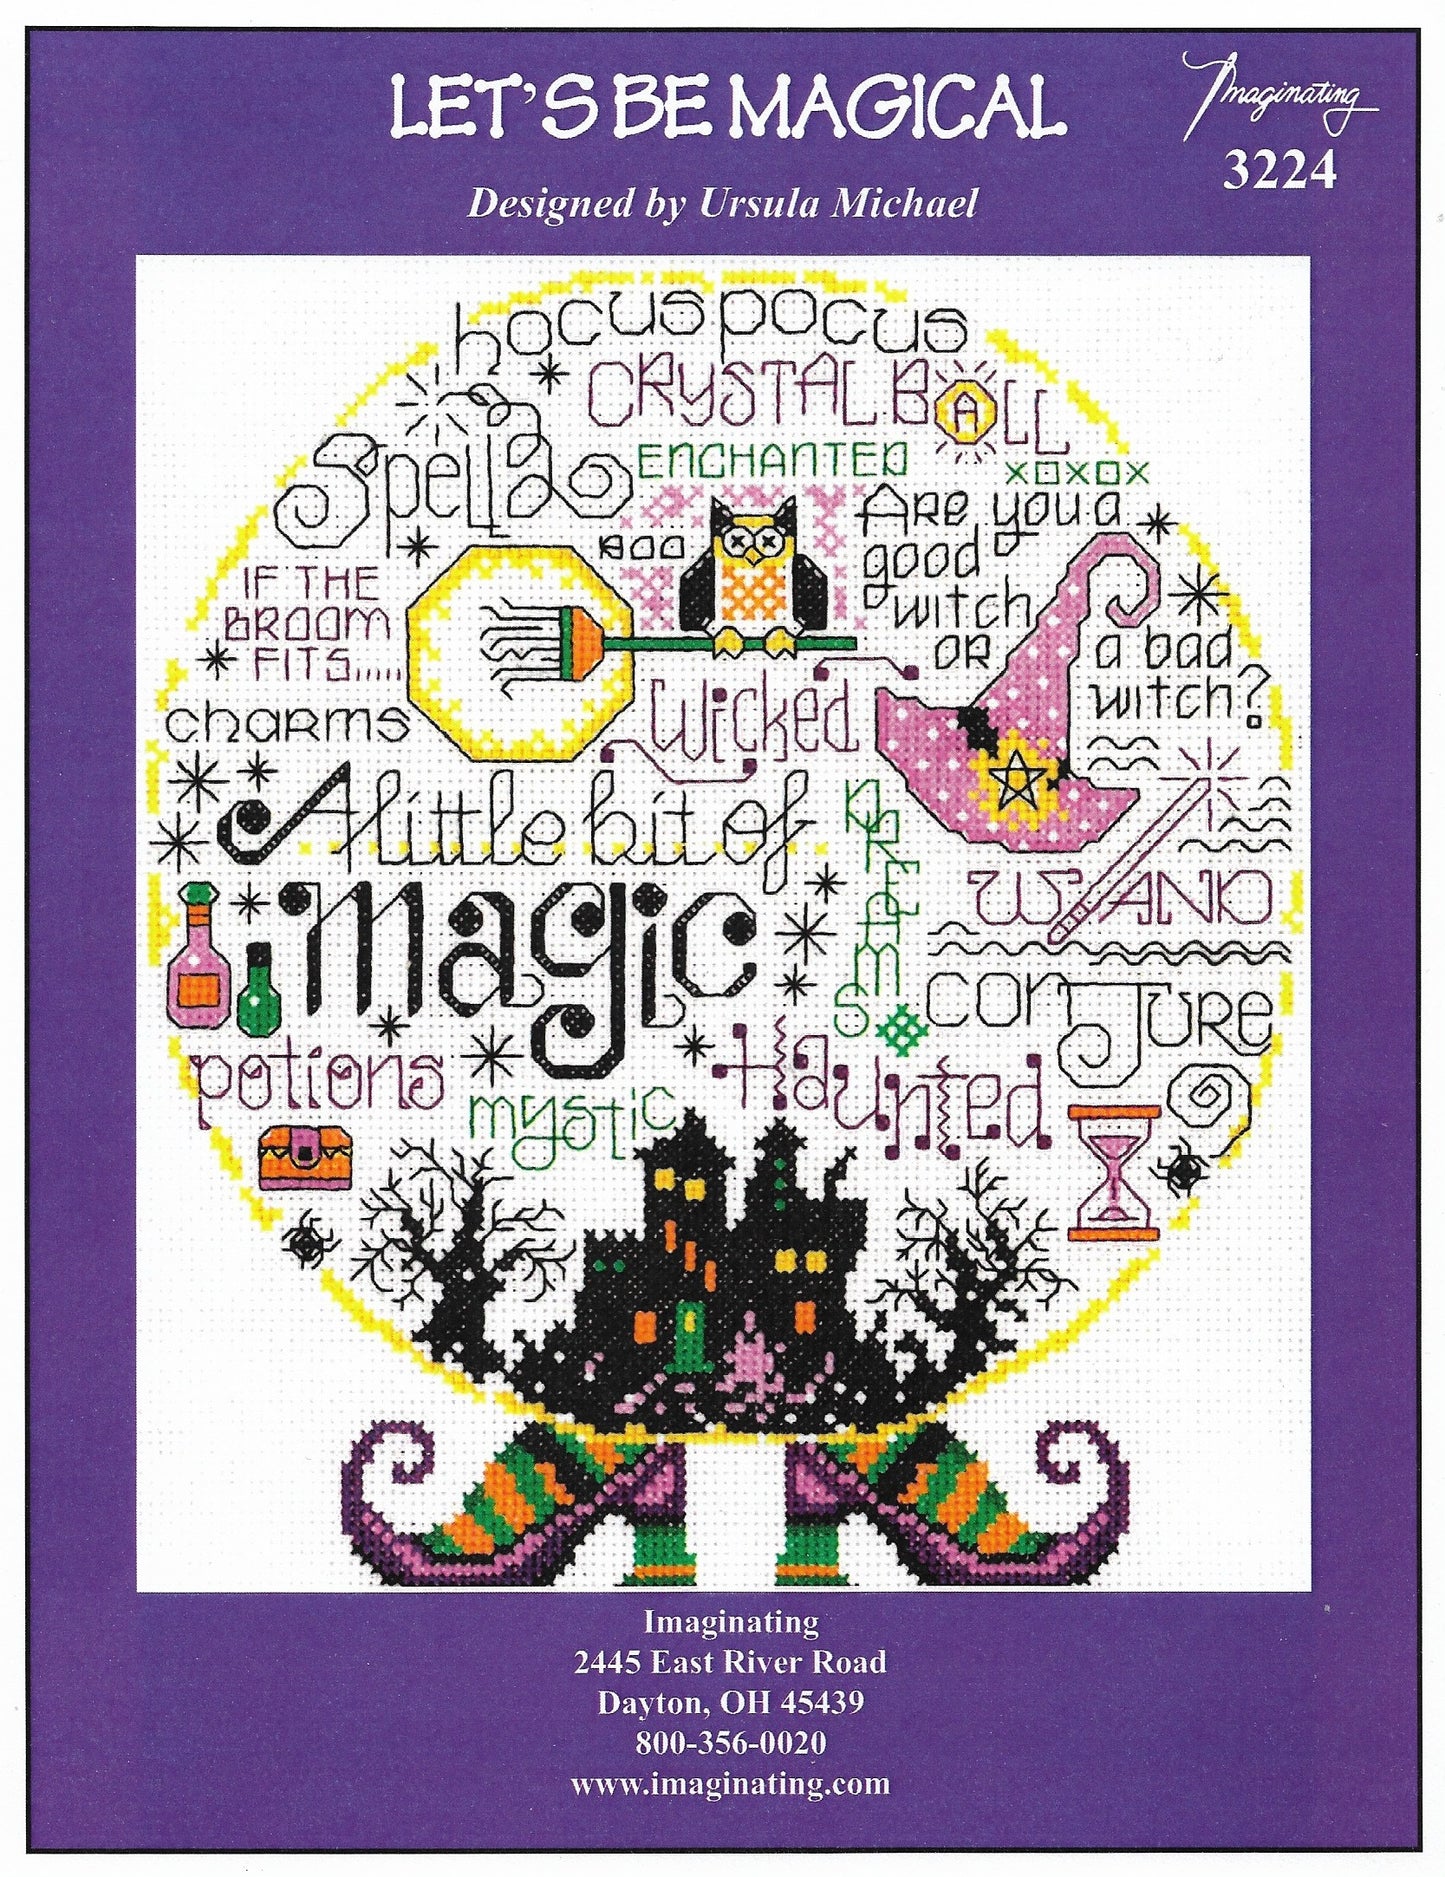 Imaginating Let's Be Magical 3224 Halloween cross stitch pattern